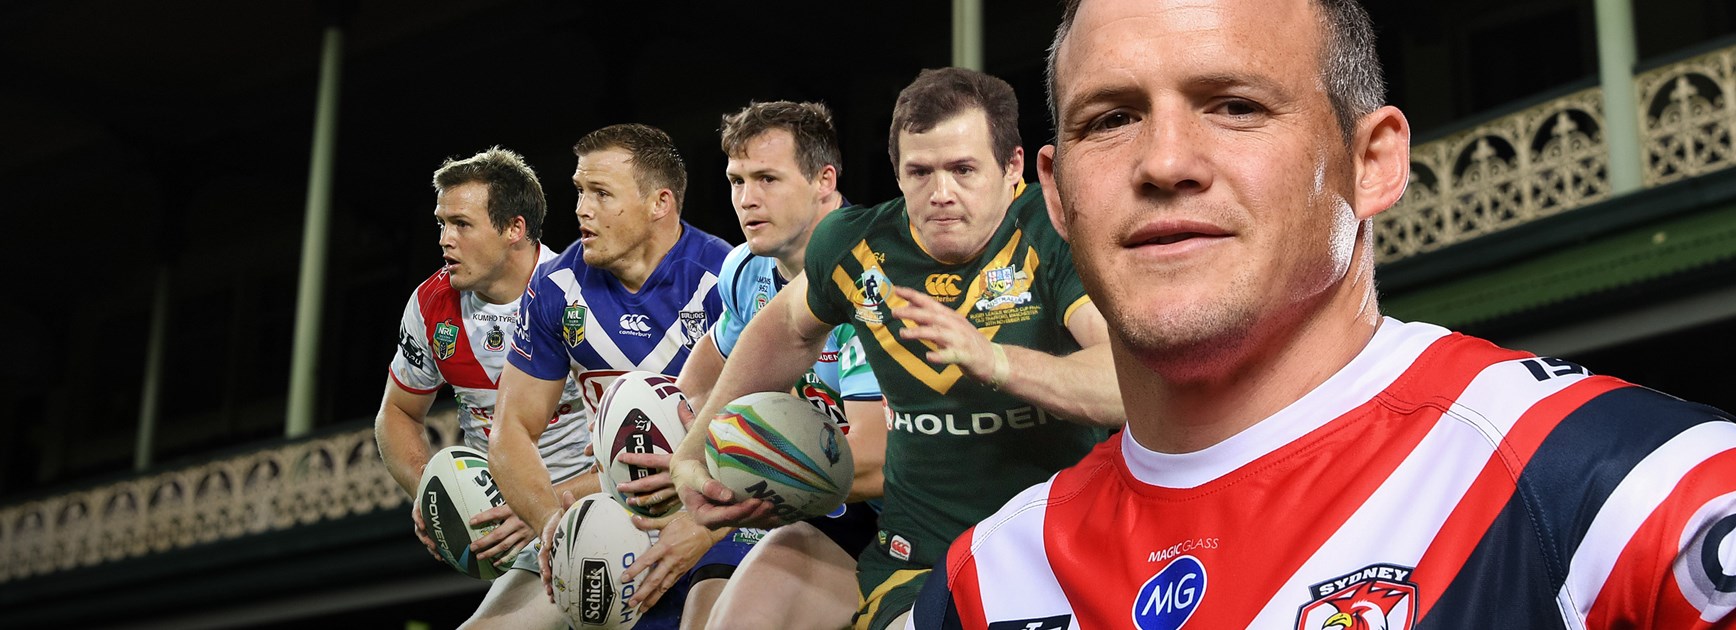 Brett Morris signs off as one of the greats